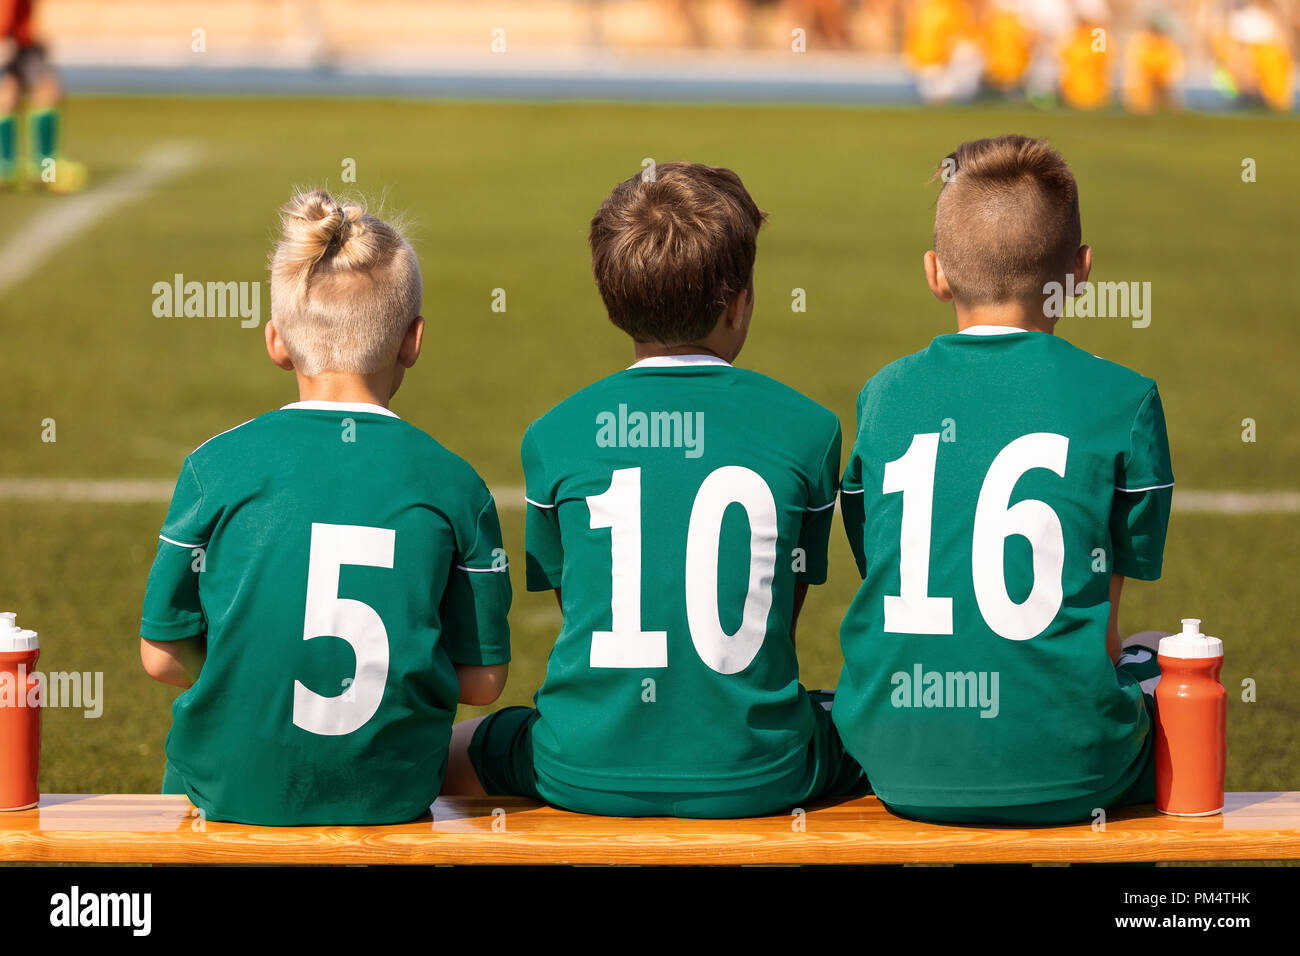 Kids Football Team. Soccer children watching game. Football soccer tournament match for children. Kids substitute players sitting on a wooden bench Stock Photo